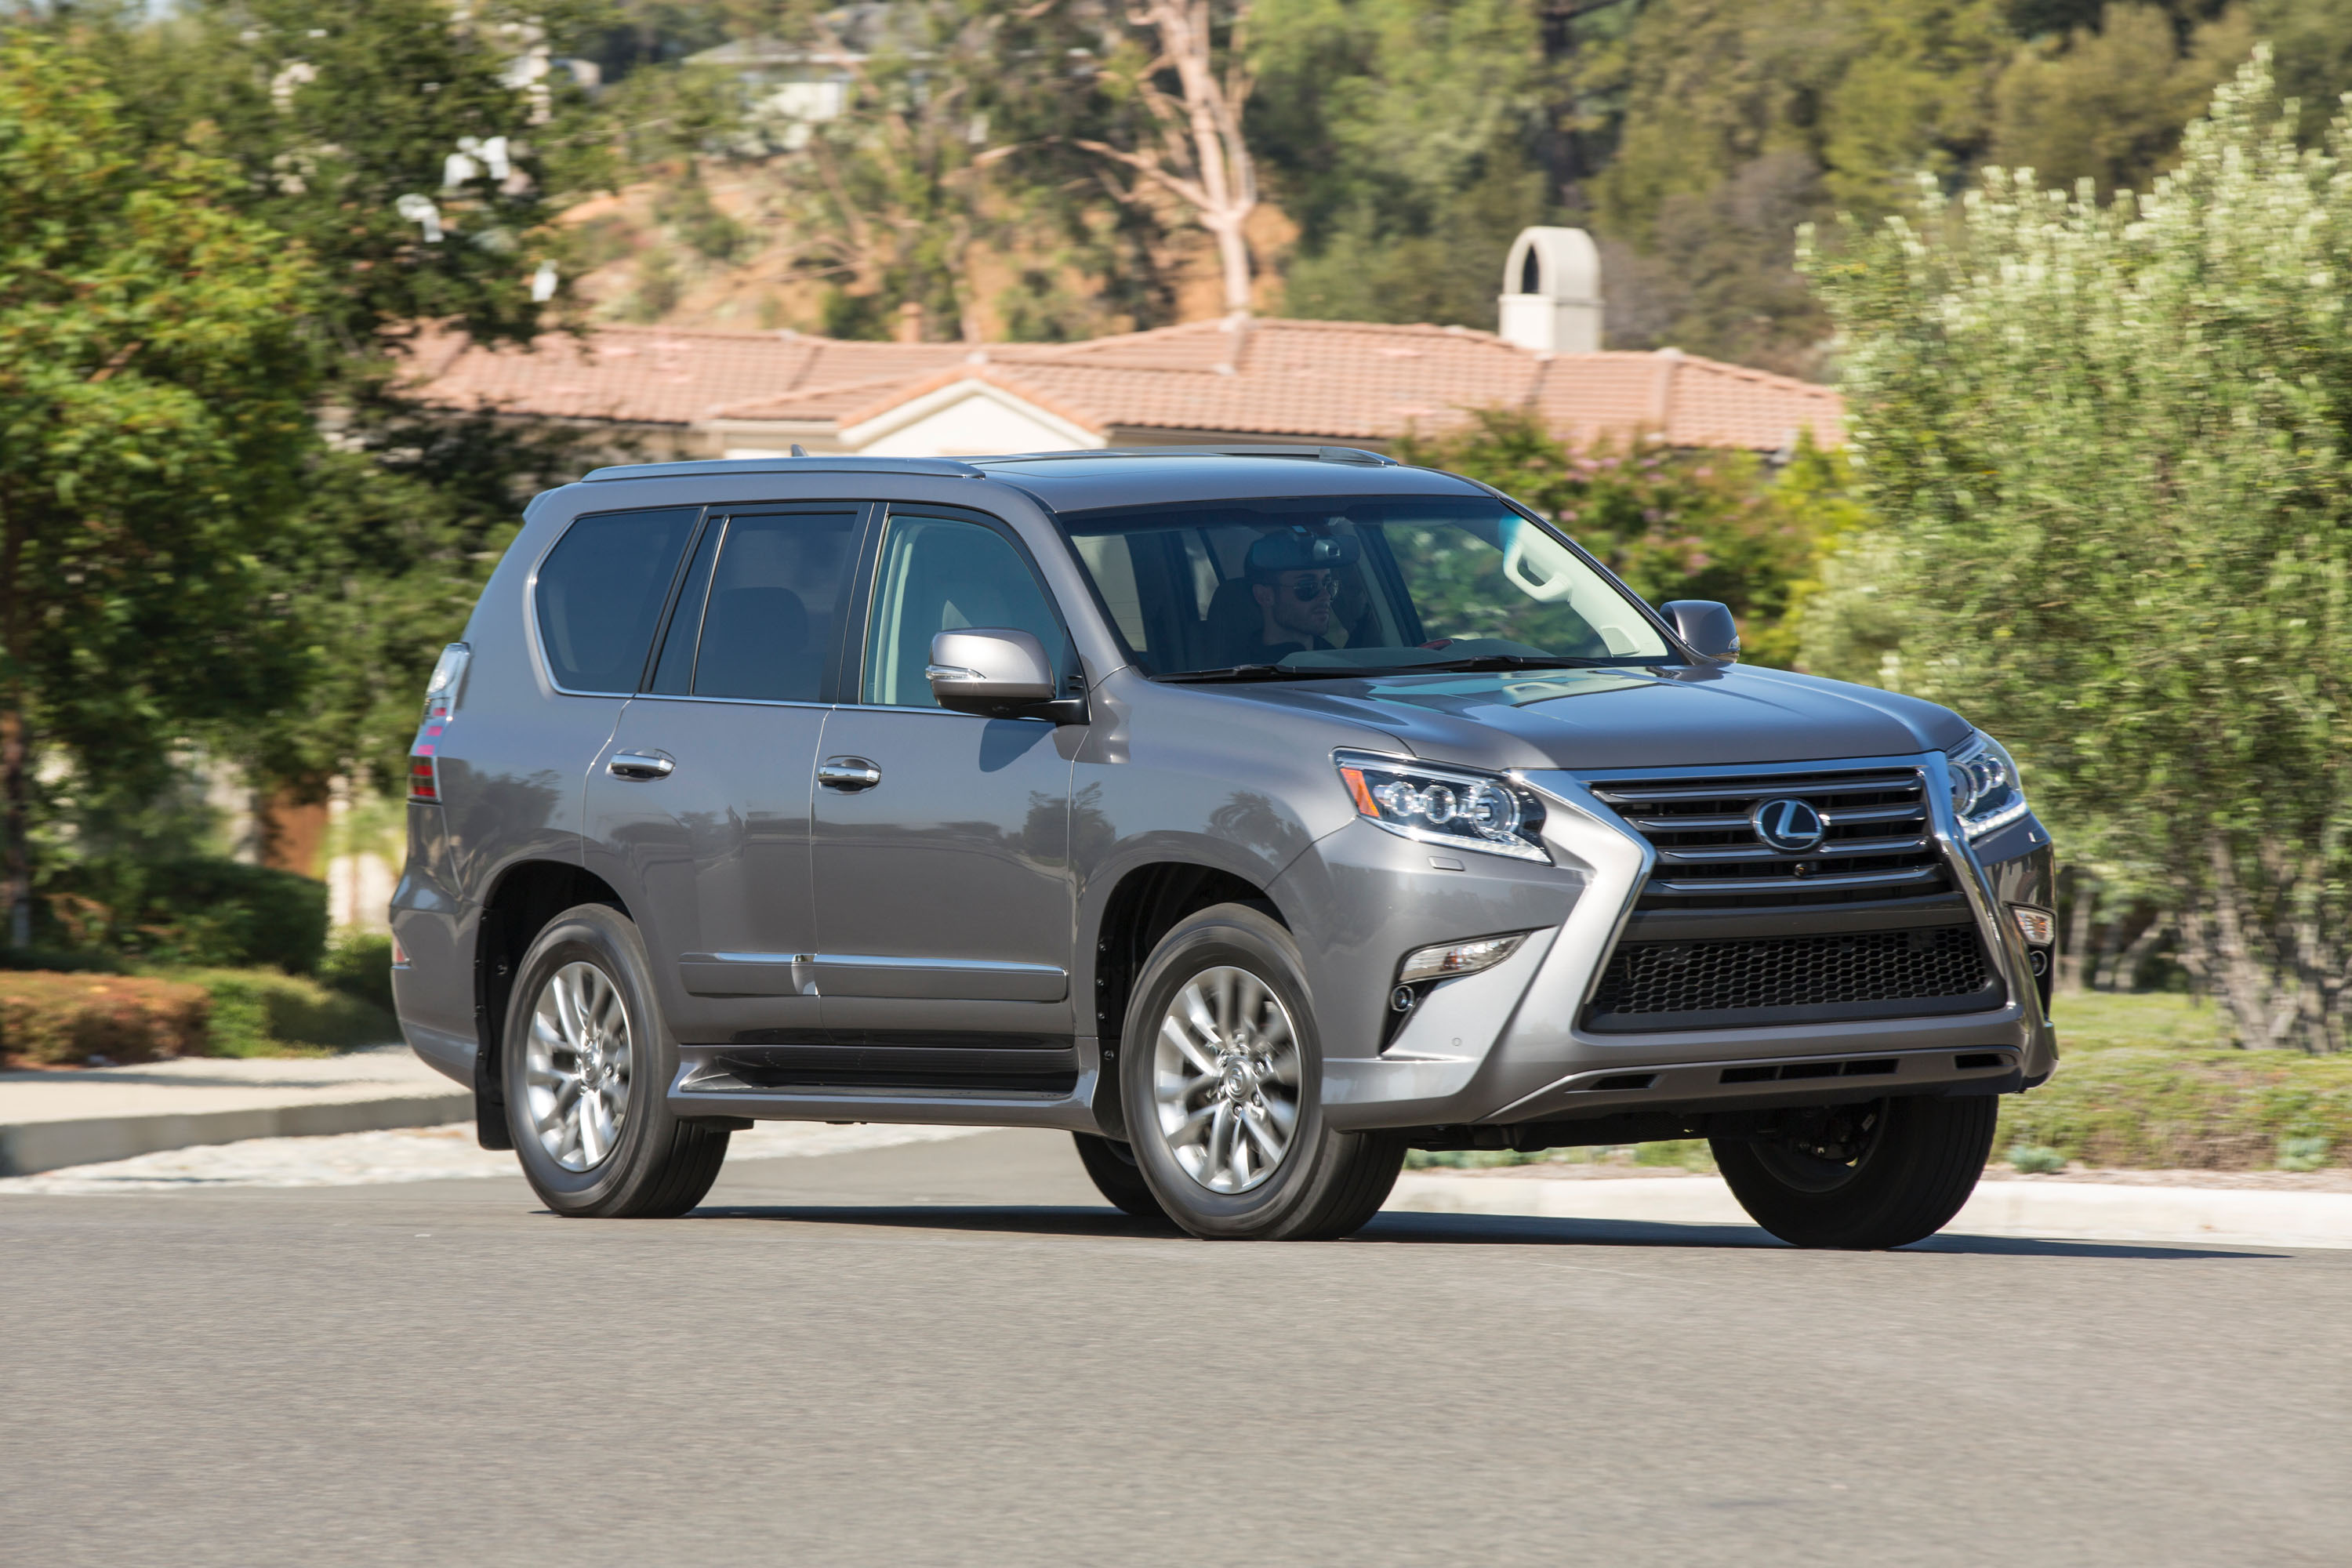 Hooning The Countryside In A 2015 Lexus GX 460